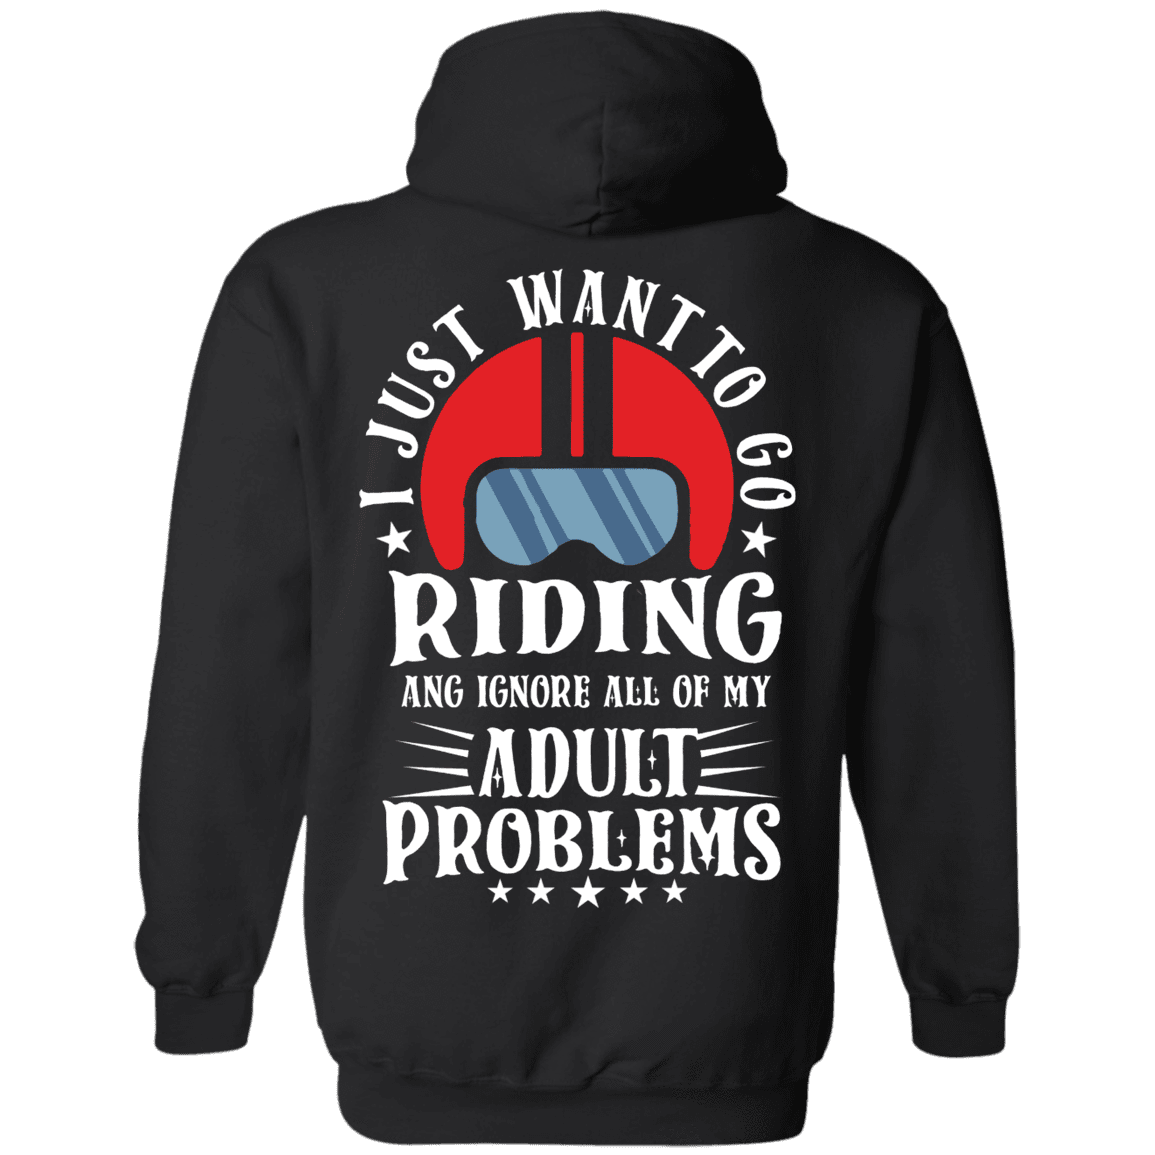 I Just Want to Go Riding T-Shirt & Hoodies - American Legend Rider